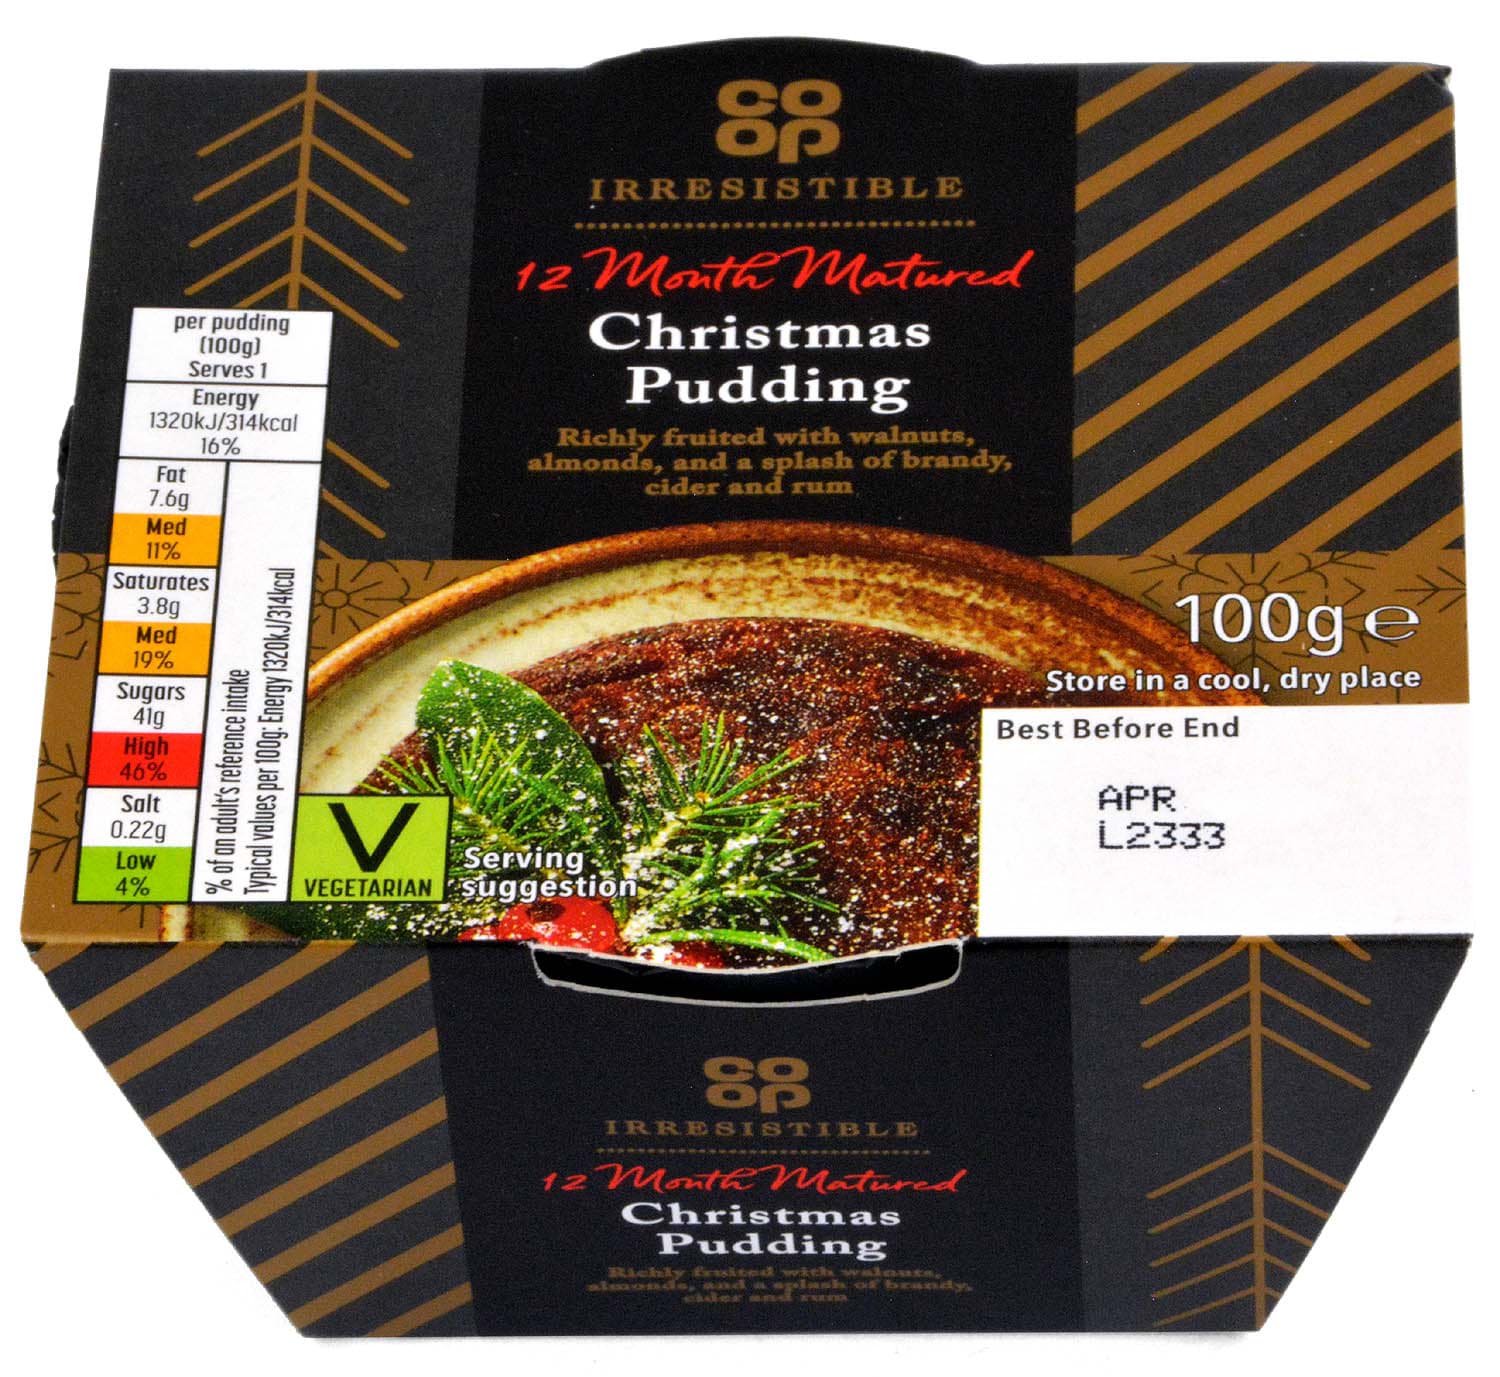 Picture of Co-op Christmas Pudding 12 Month Matured 100g